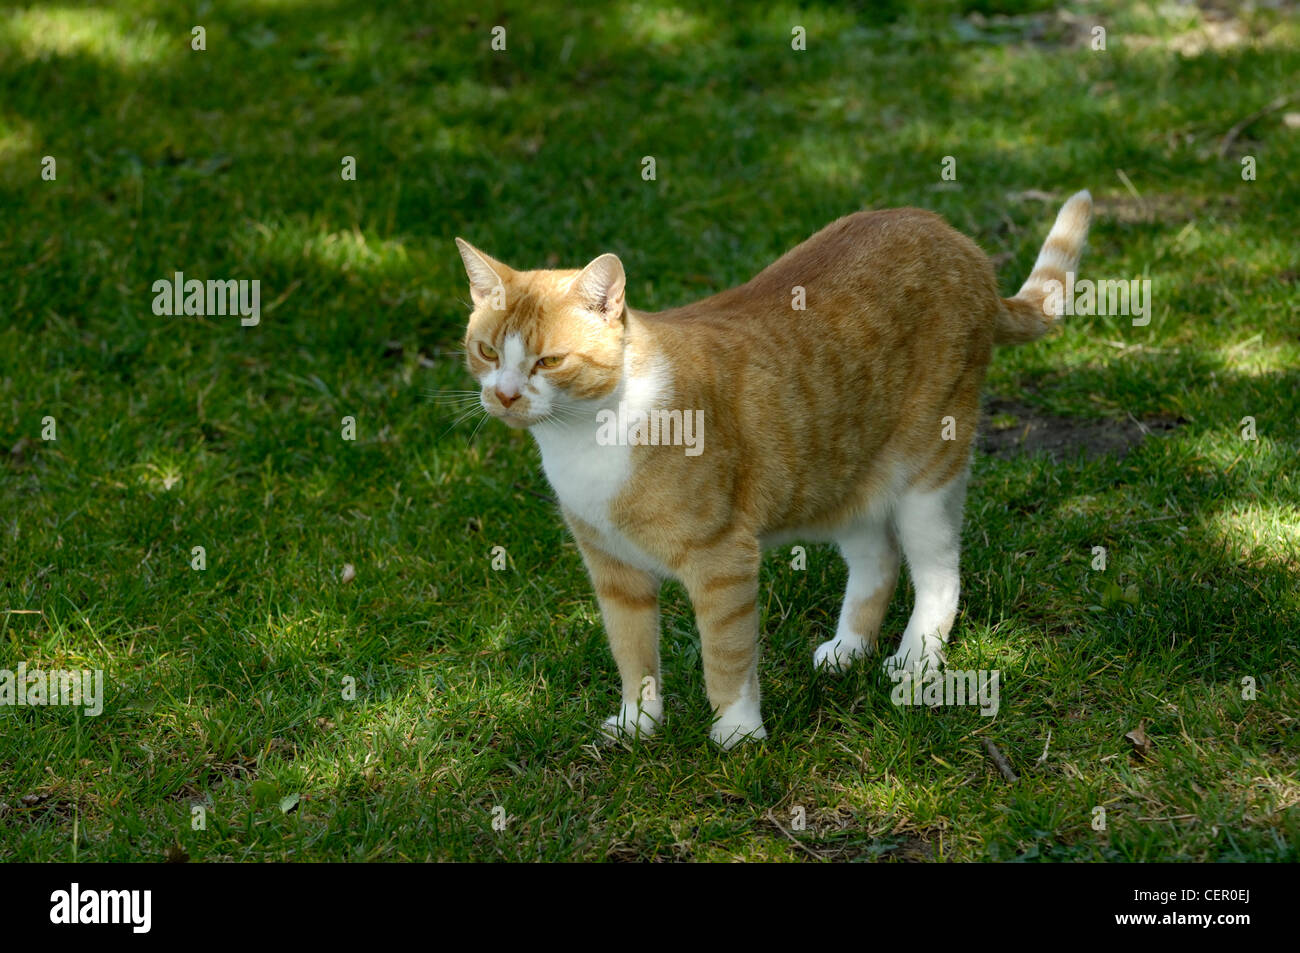 A ginger cat standing on grass Stock Photo